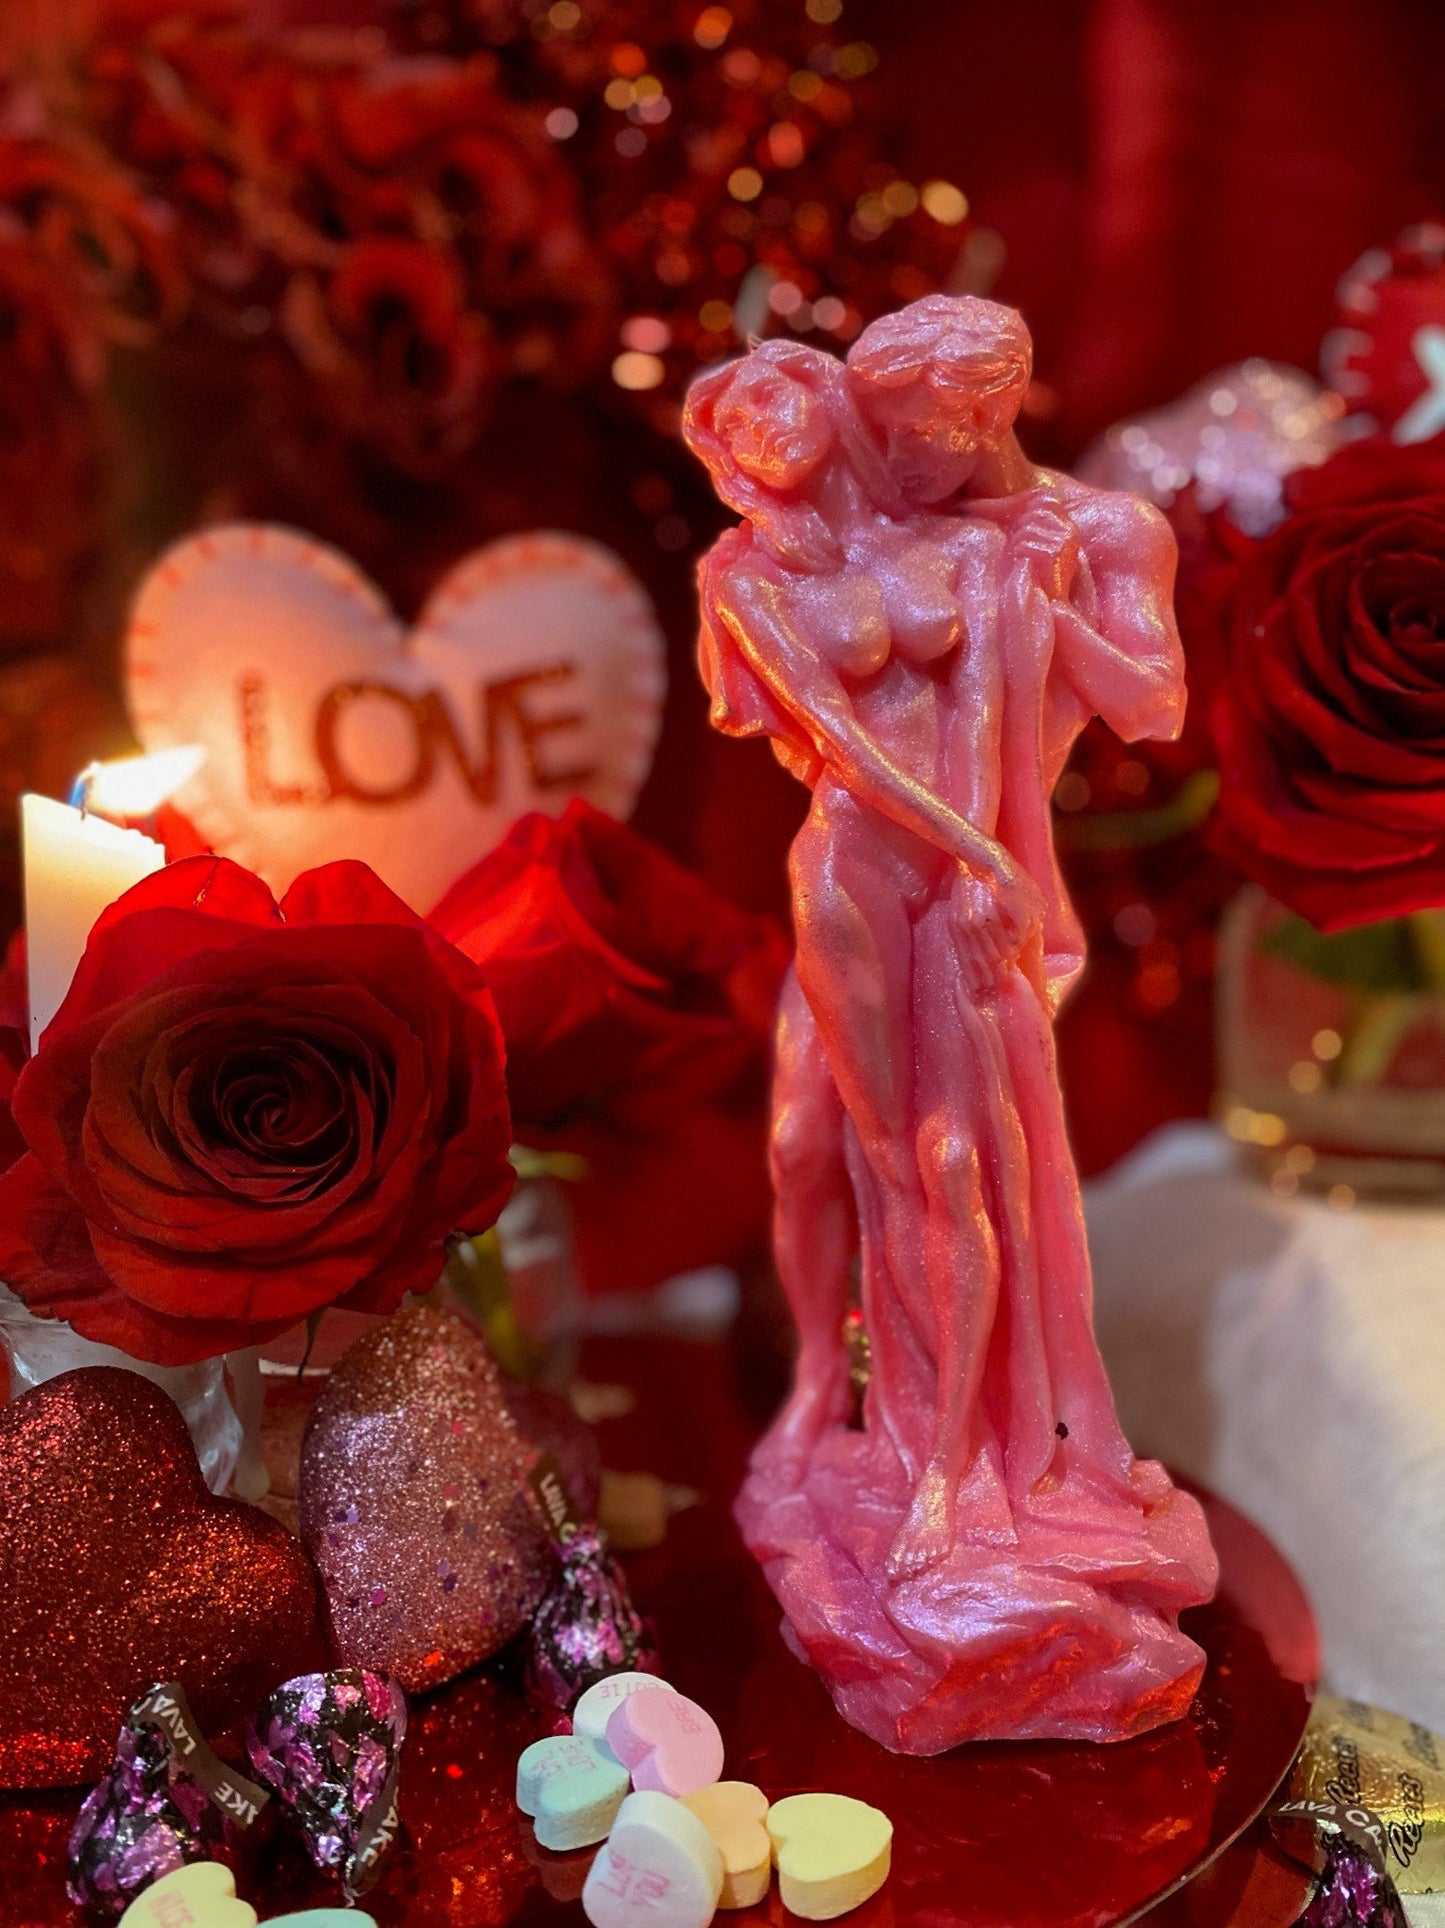 Male & Female Lovers Candle + Adam and Eve + Passion + Binding + Marriage + Friendship + Valentine’s Day